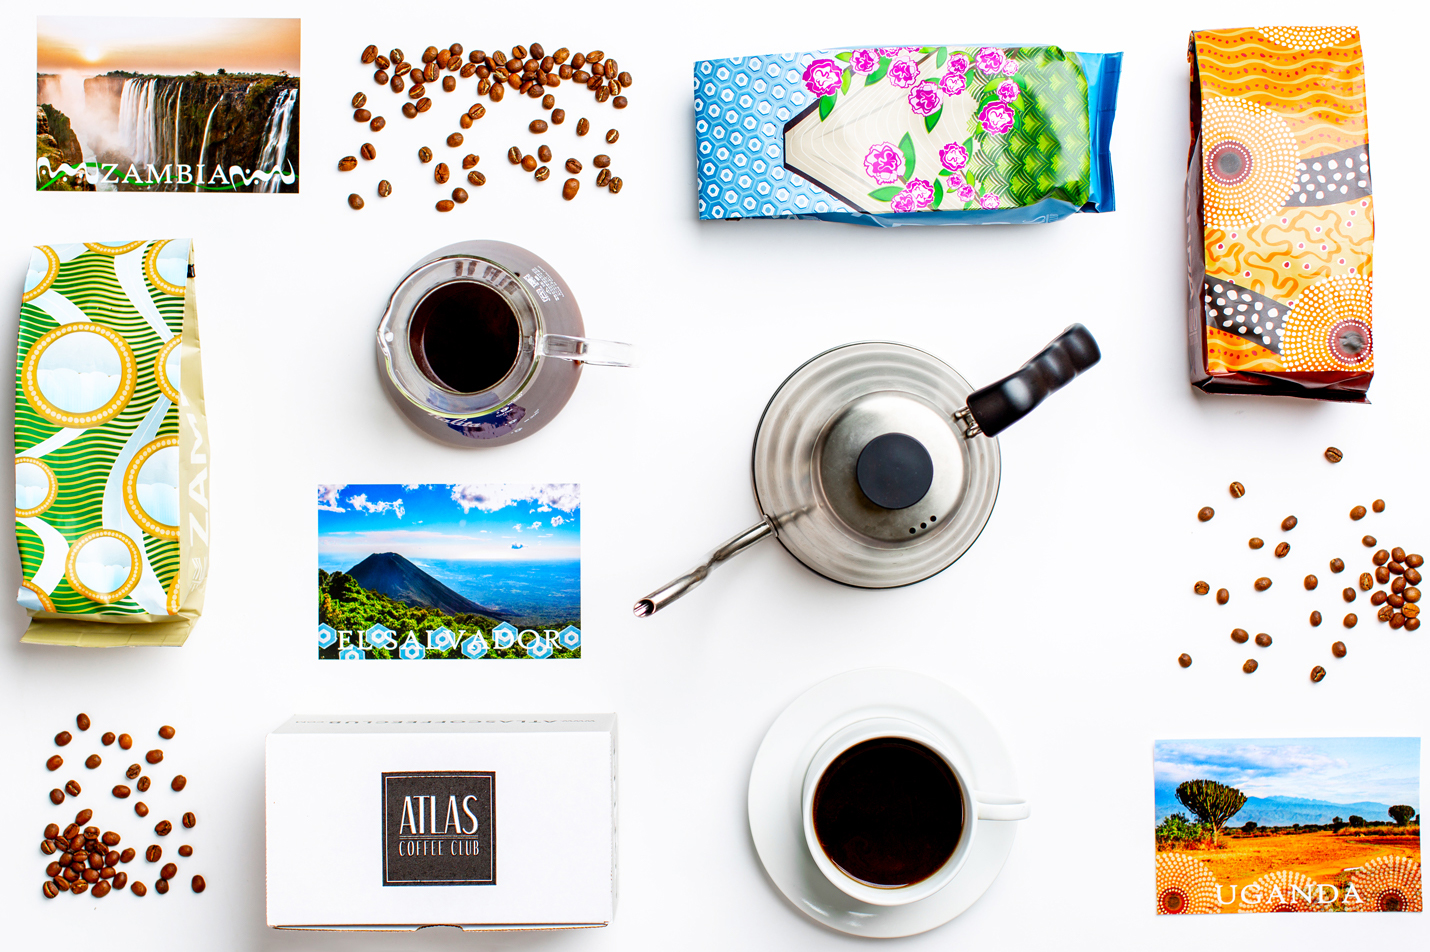 Atlas Coffee Club Black Friday 2021 Deal: Save $15 Off Subscriptions + $55 Off Gifts